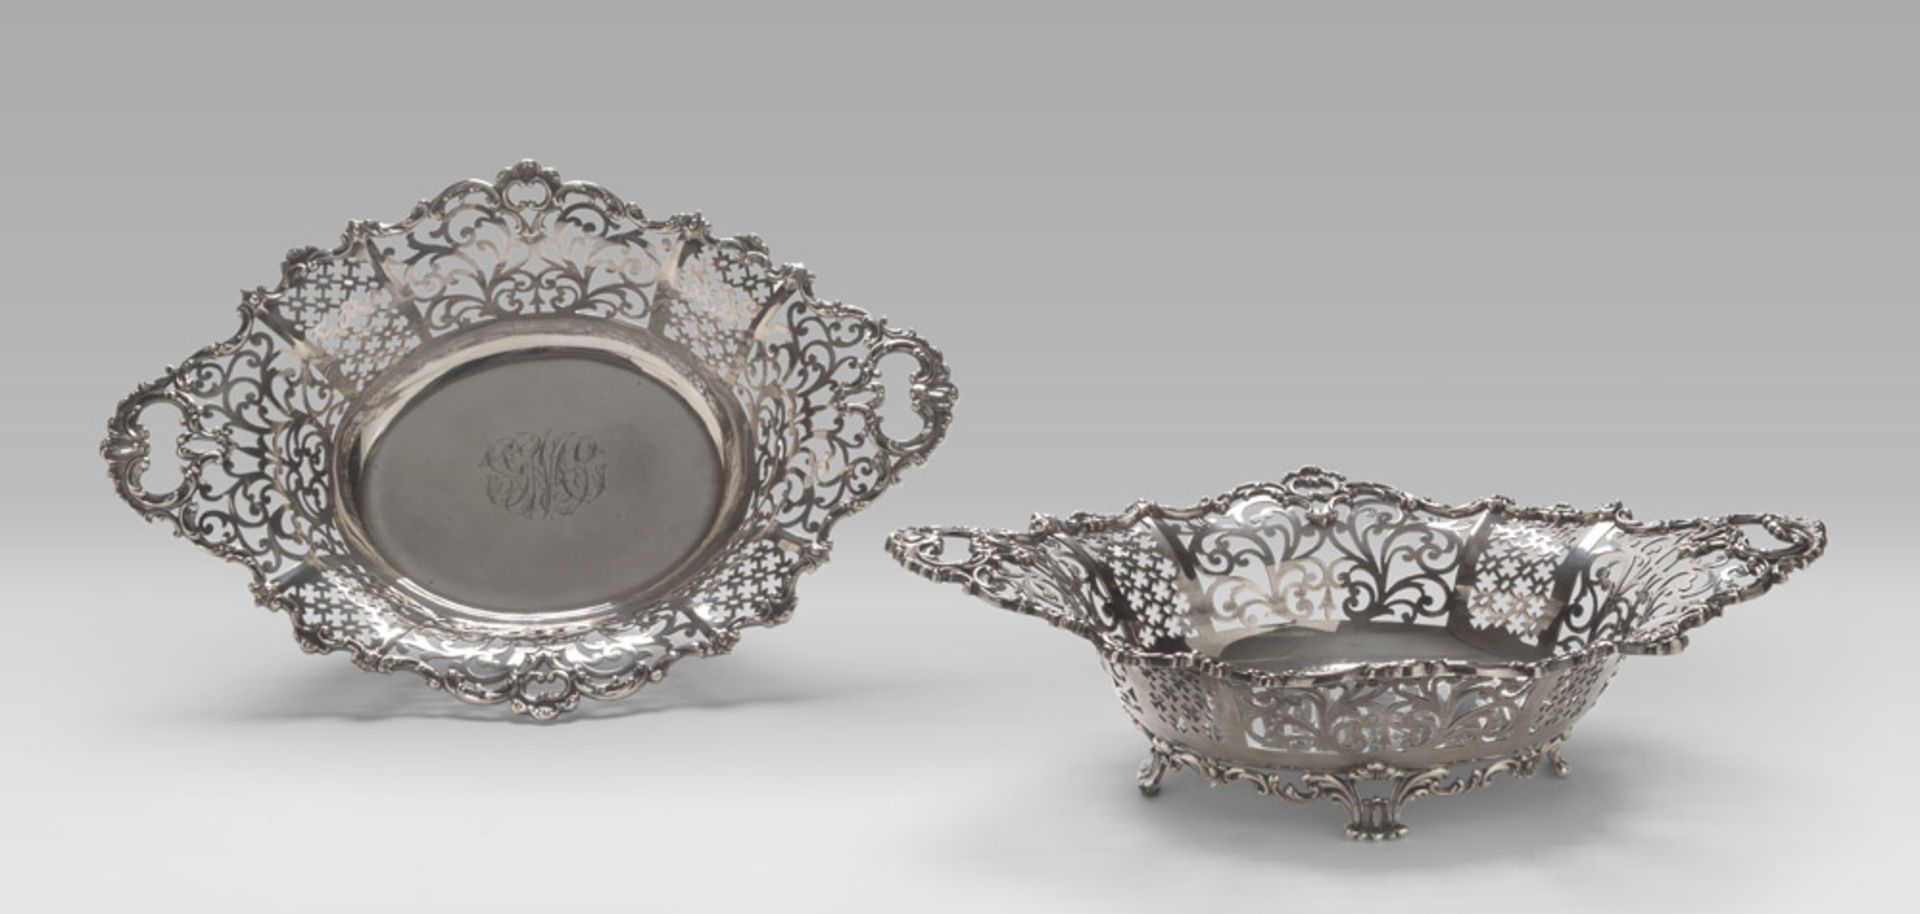 A PAIR OF SILVERBASKETS, PUNCH NEW YORK 1896 with edge pierced to vegetable motifs. Leaves feet.